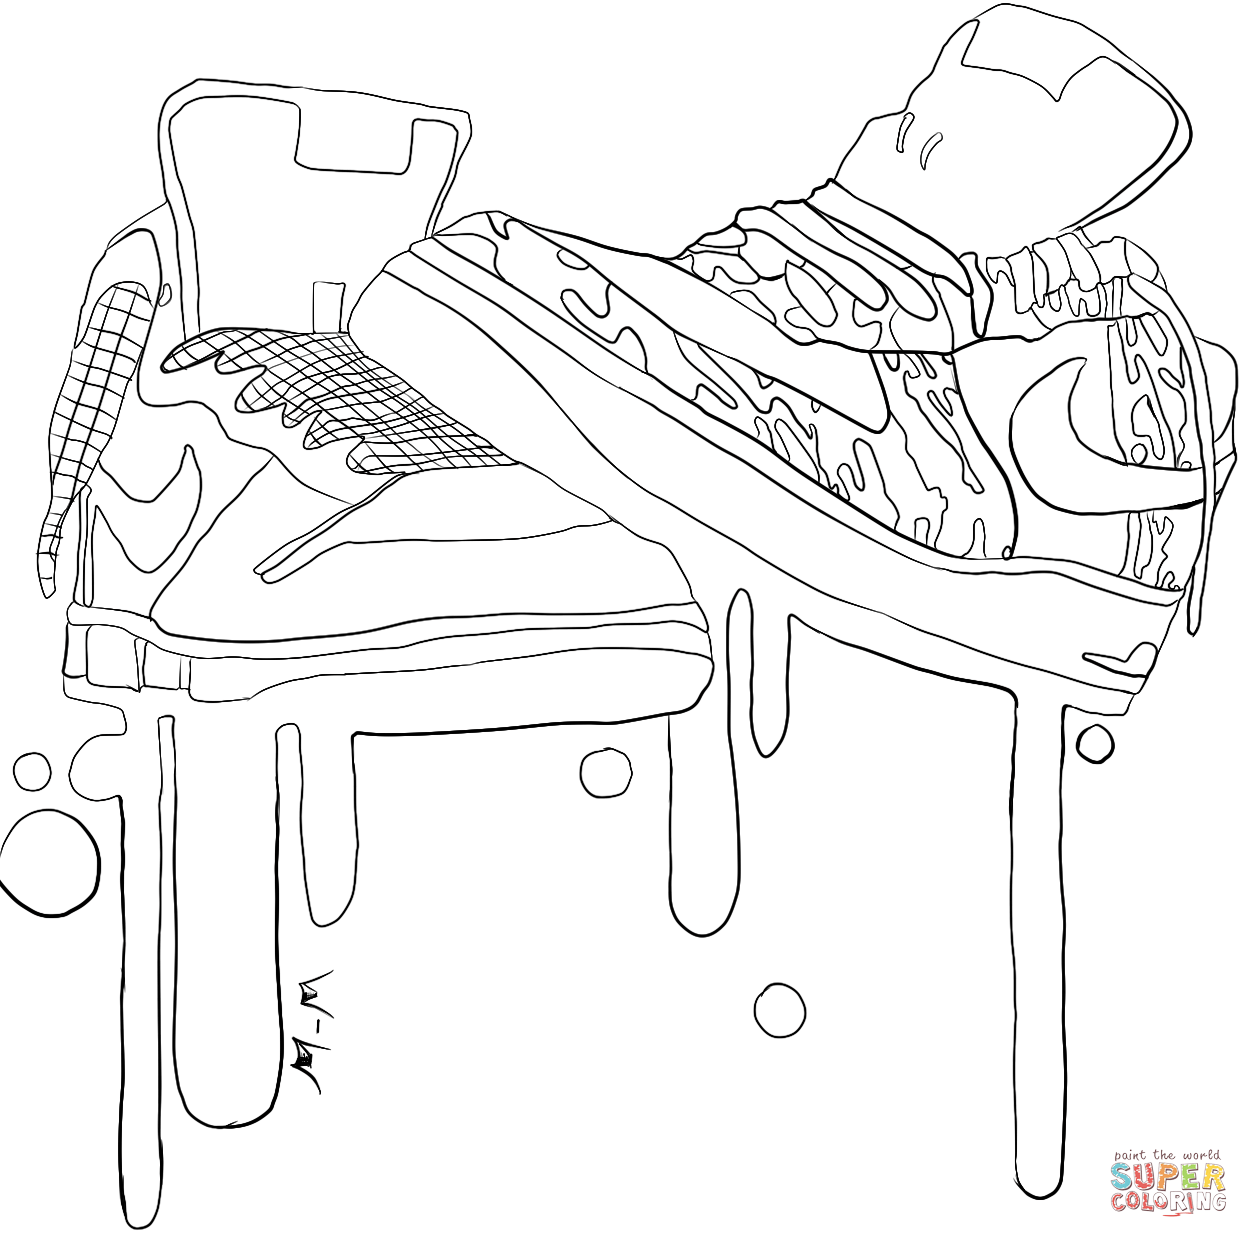 Nike Sneakers coloring page | Free Printable Coloring Pages